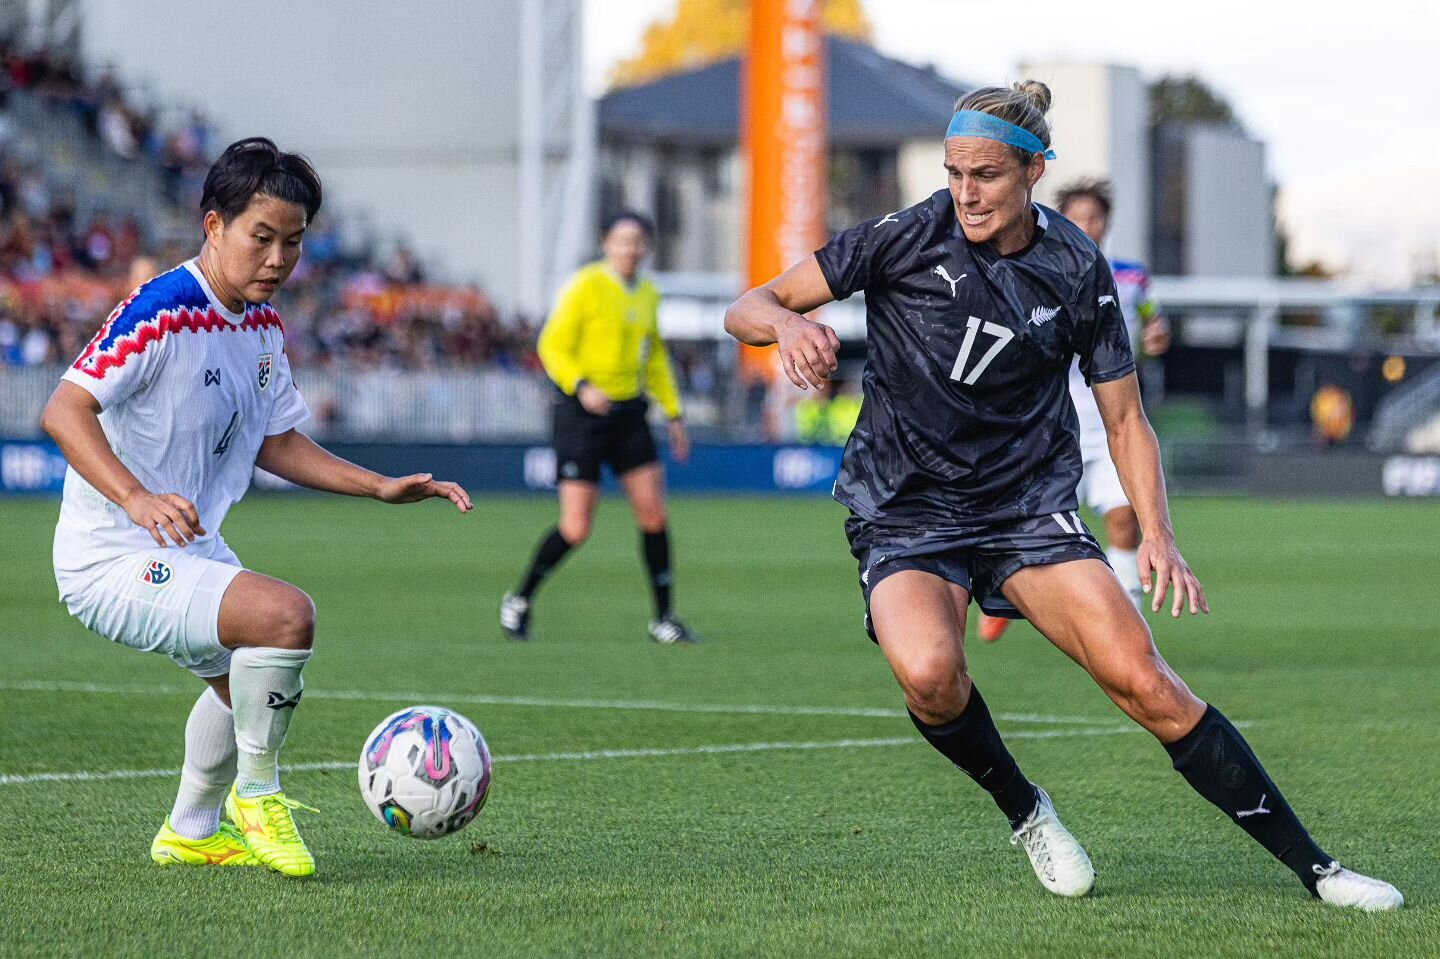 Photo highlights from the International friendly between New Zealand and Thailand which was played at Christchurch's Apollo Project's Stadium on a sunny Saturday afternoon as the Football Ferns posed for a starting eleven photo (see photo 10).

Three